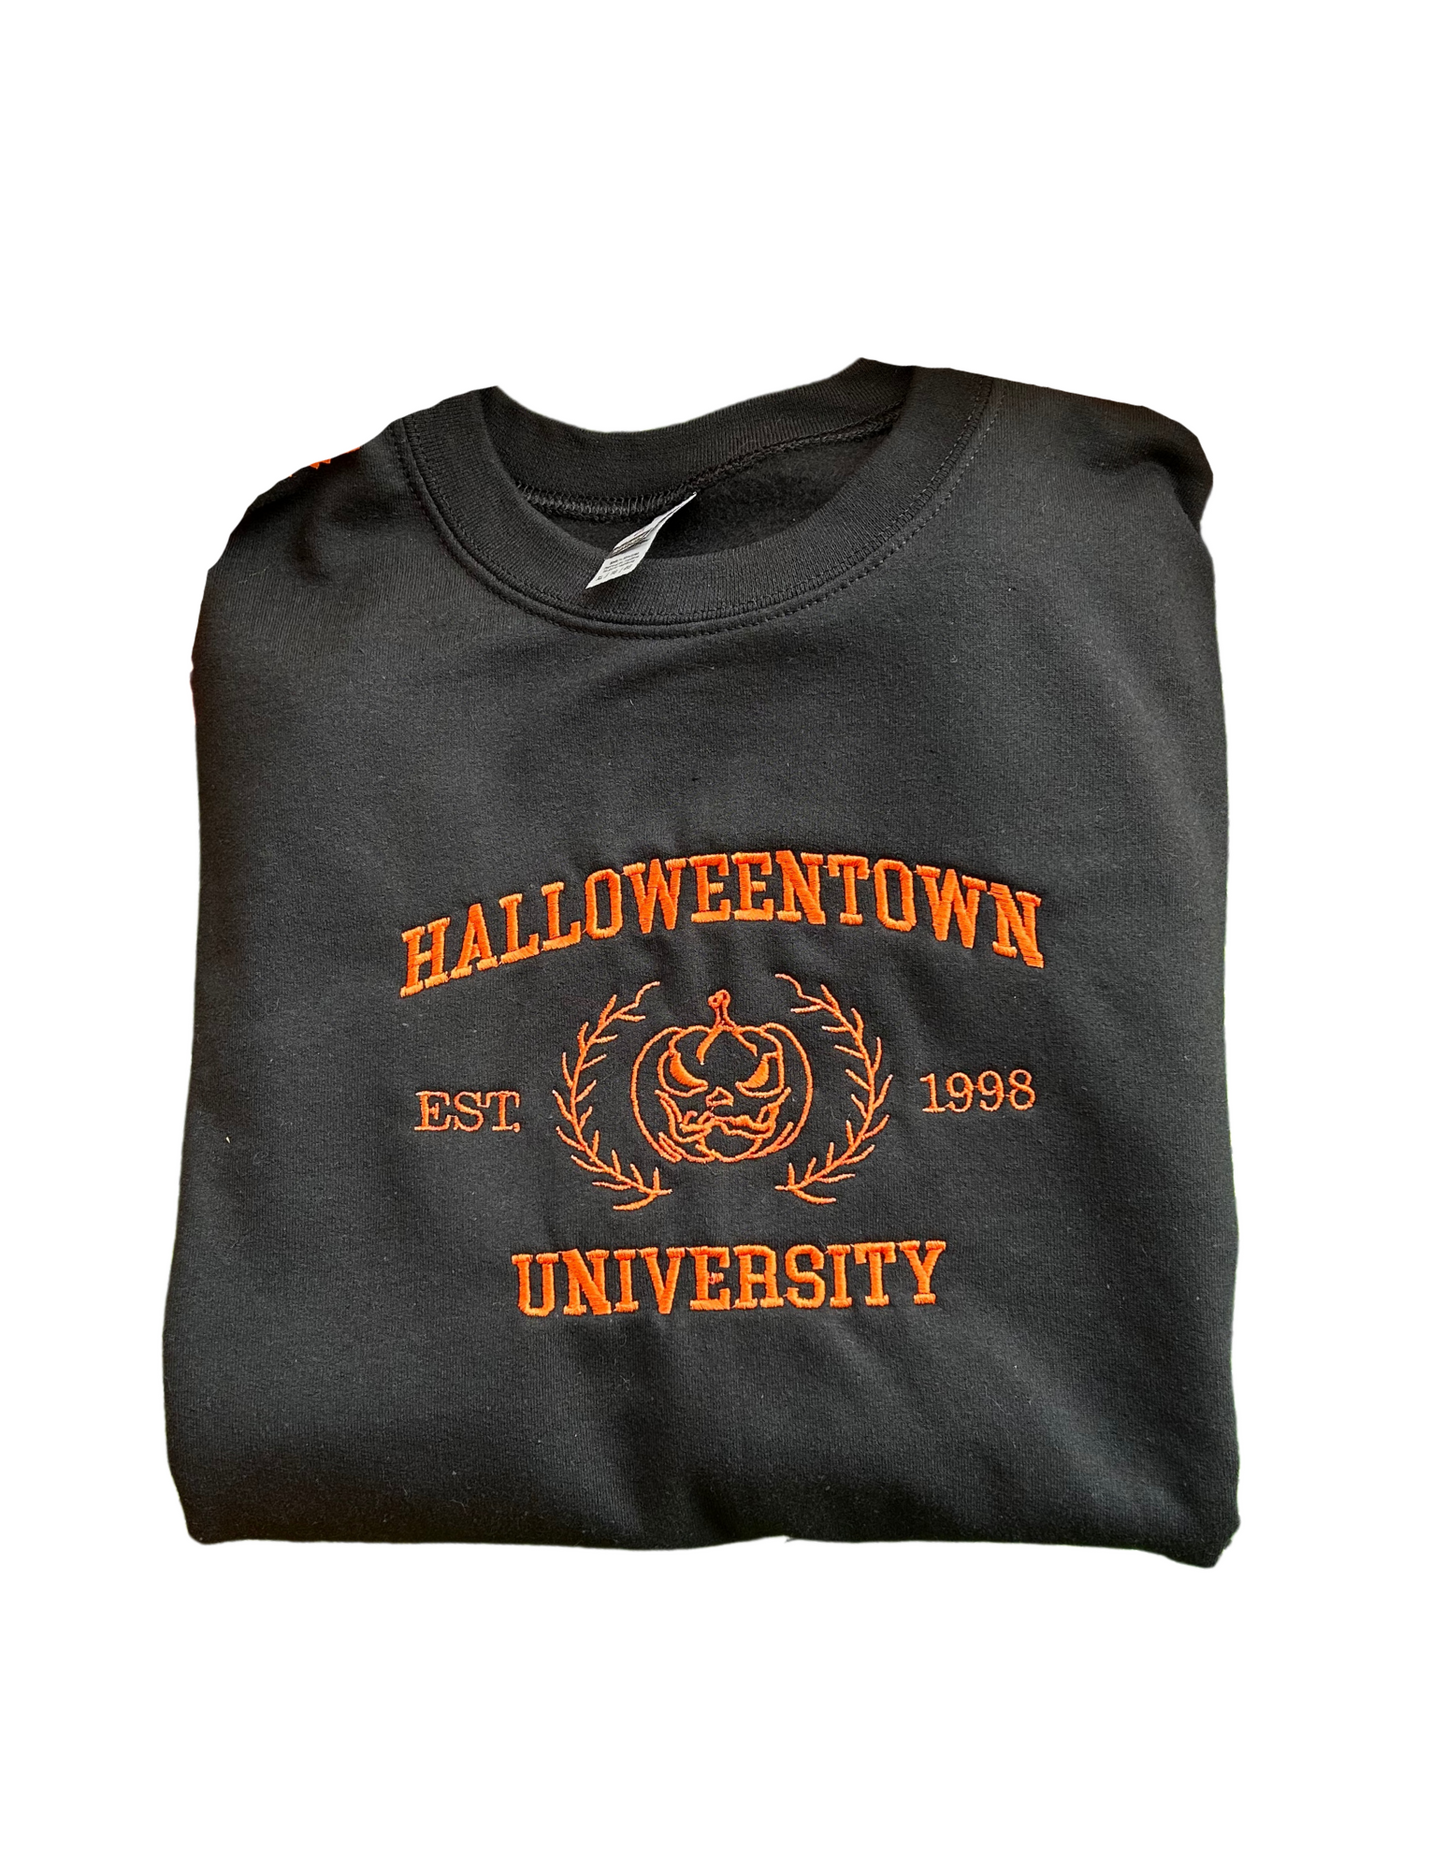 Embroidered 'Halloween University Scary Pumpkin Head'  Hoodie or Crew Neck, Long Sleeve, Classic fit, Unisex, Adult